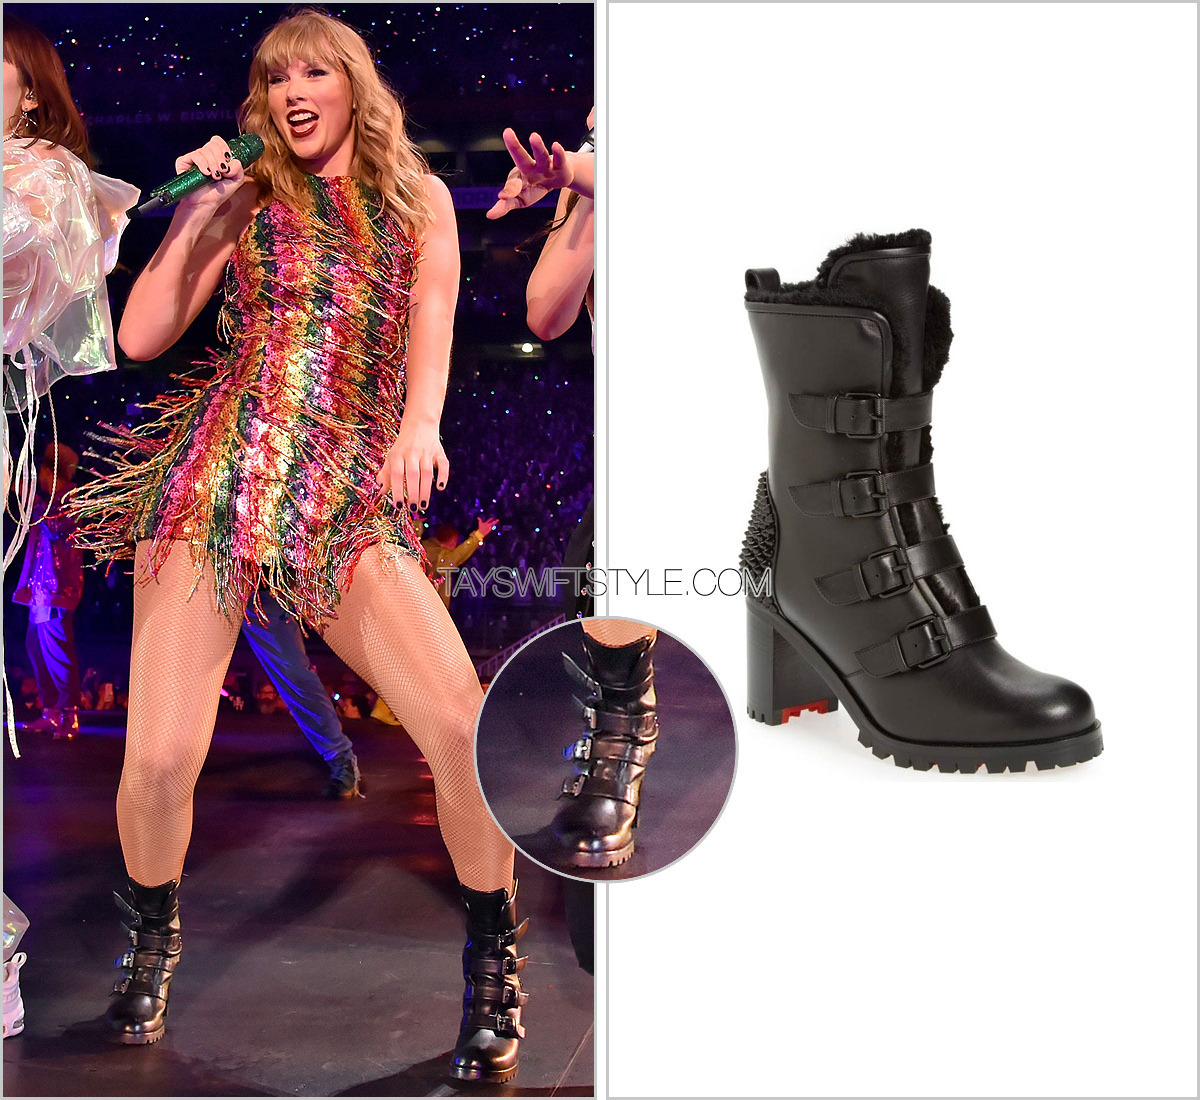 Taylor Swift's Street Style and the Louis Vuitton Hiking Boot